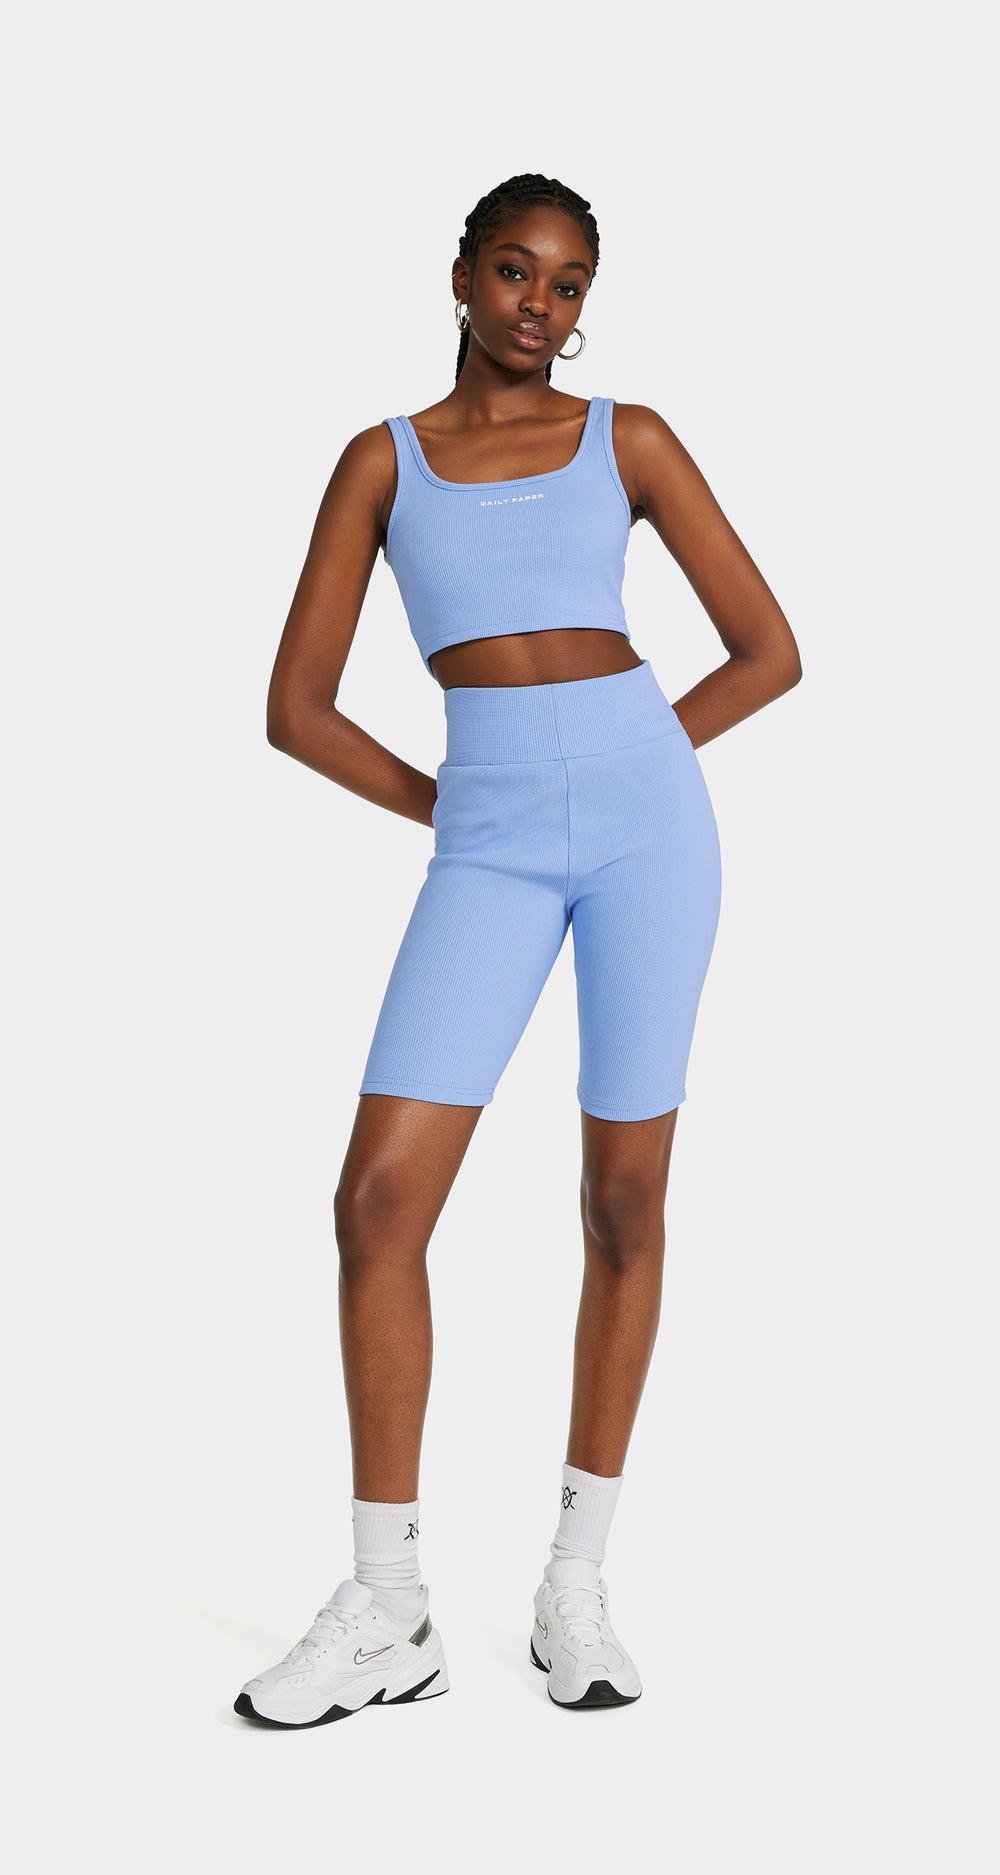 DP - Baby Blue Revin Cycle Shorts - Wmn - Front